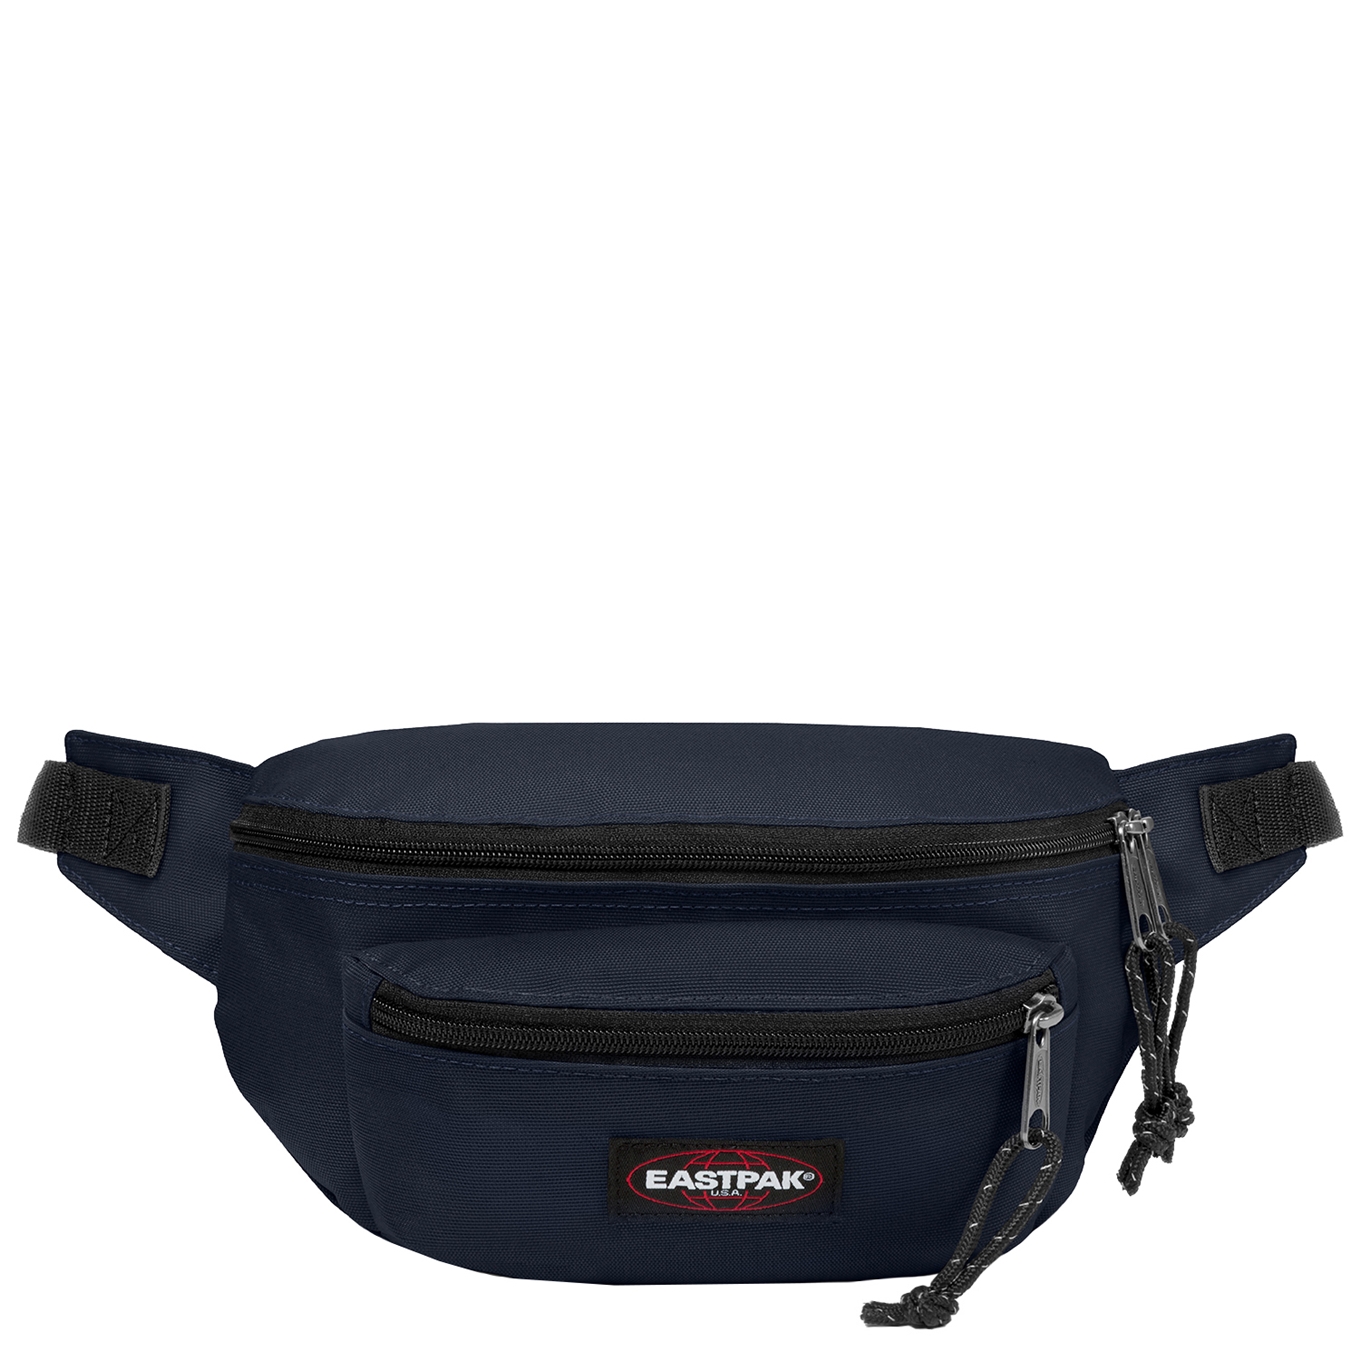 lus Vermindering Staat Eastpak Doggy Bag ultra marine | Travelbags.nl